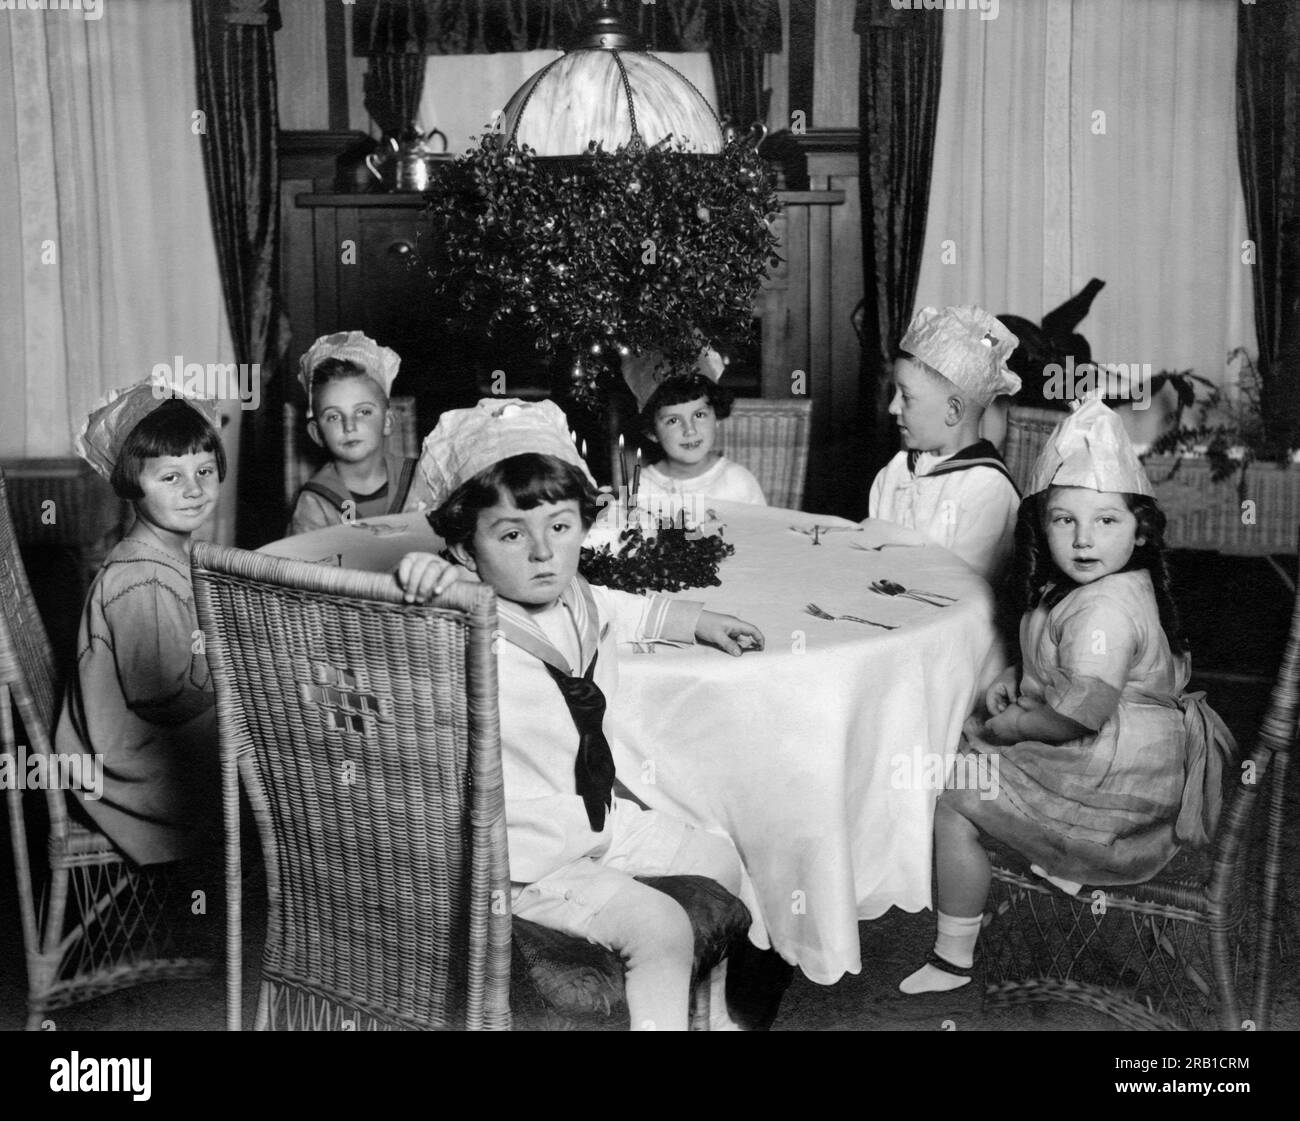 United States:  c. 1910. Six young children wearing party hats sitting around a table anxiously awaiting... Stock Photo